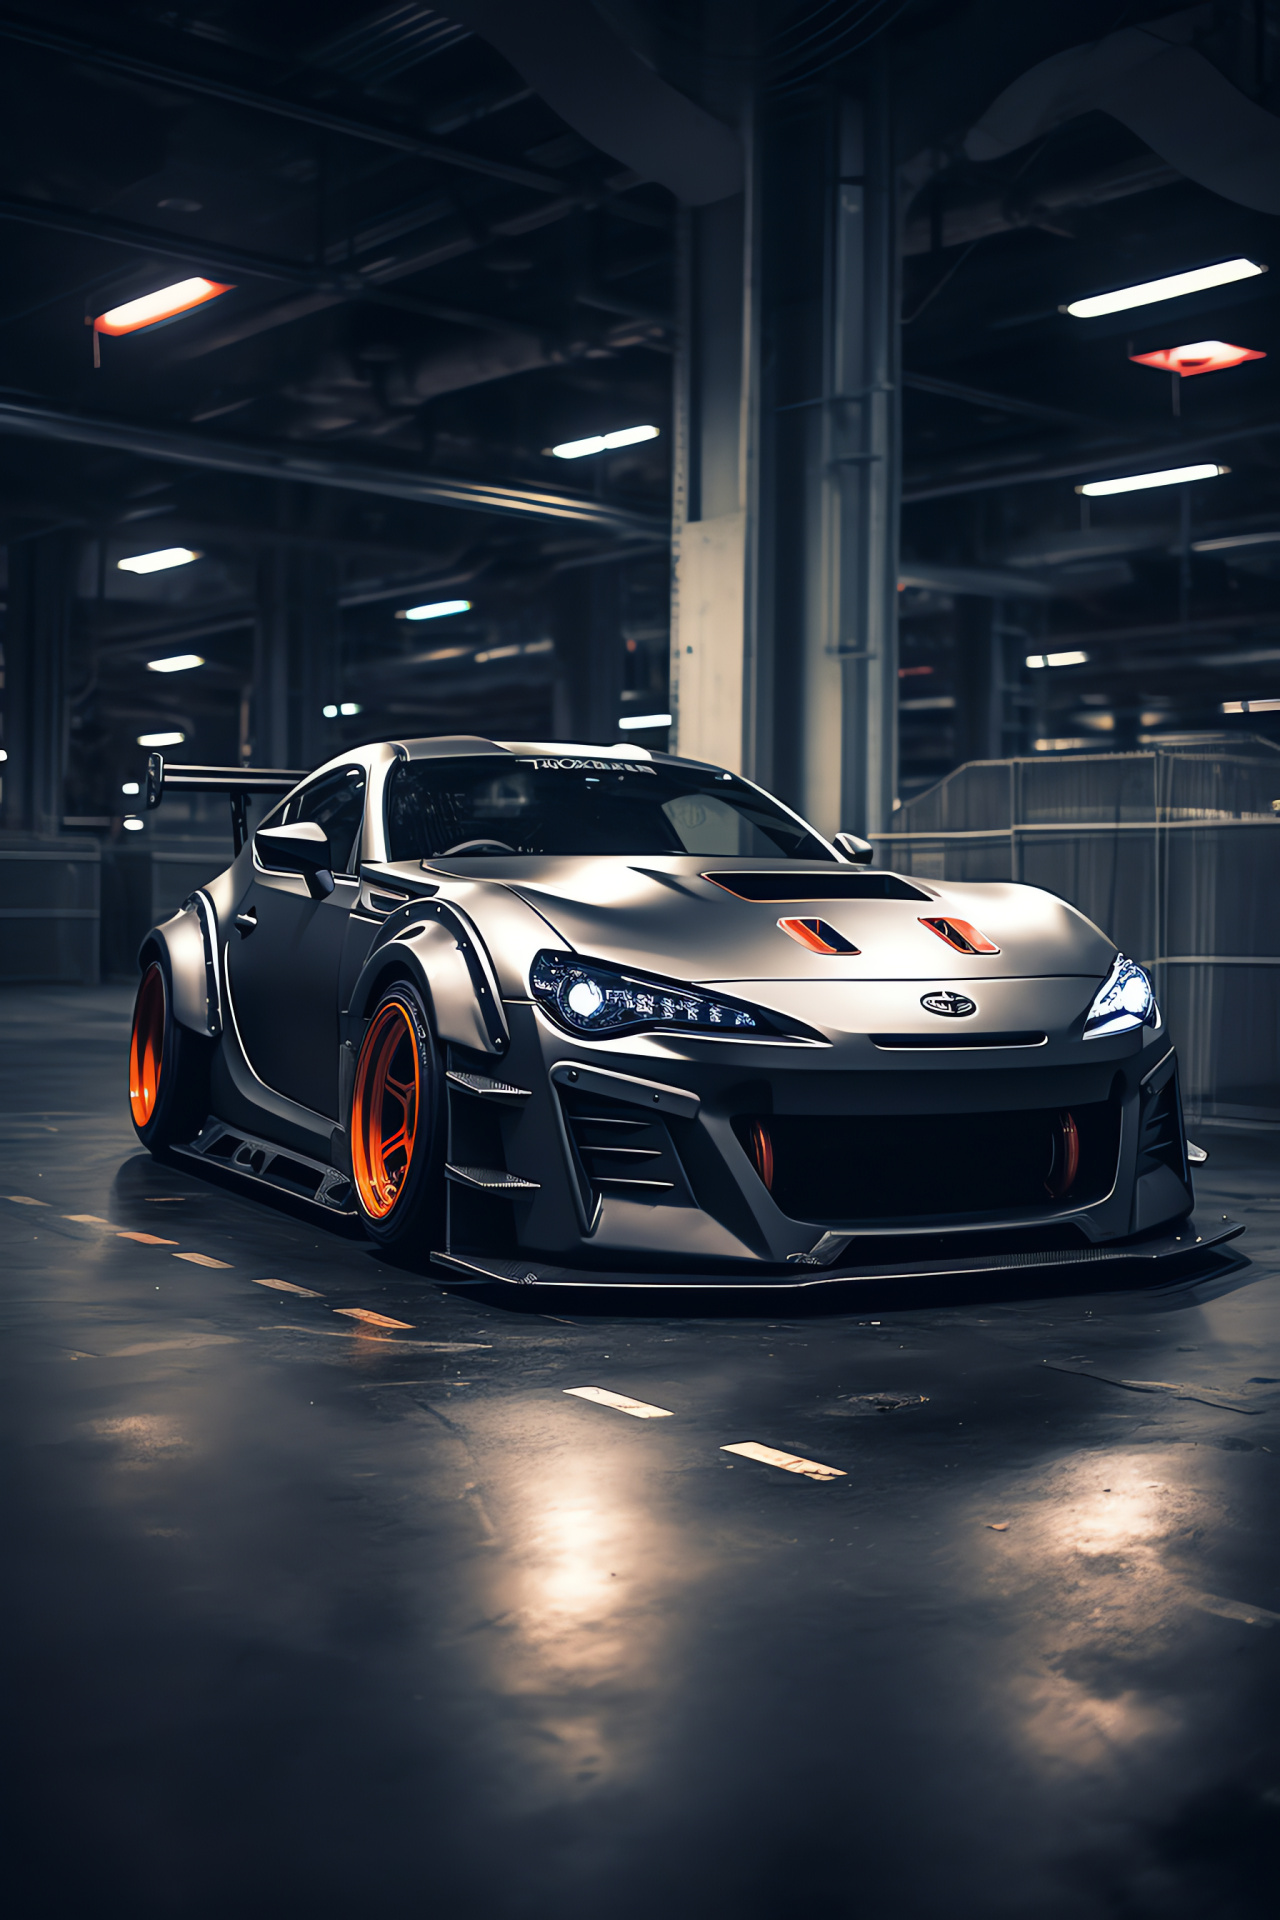 Toyota GT86 garage, Rocket Bunny modifications, Widened track presence, Lowered suspension, Tuner subculture, HD Phone Wallpaper